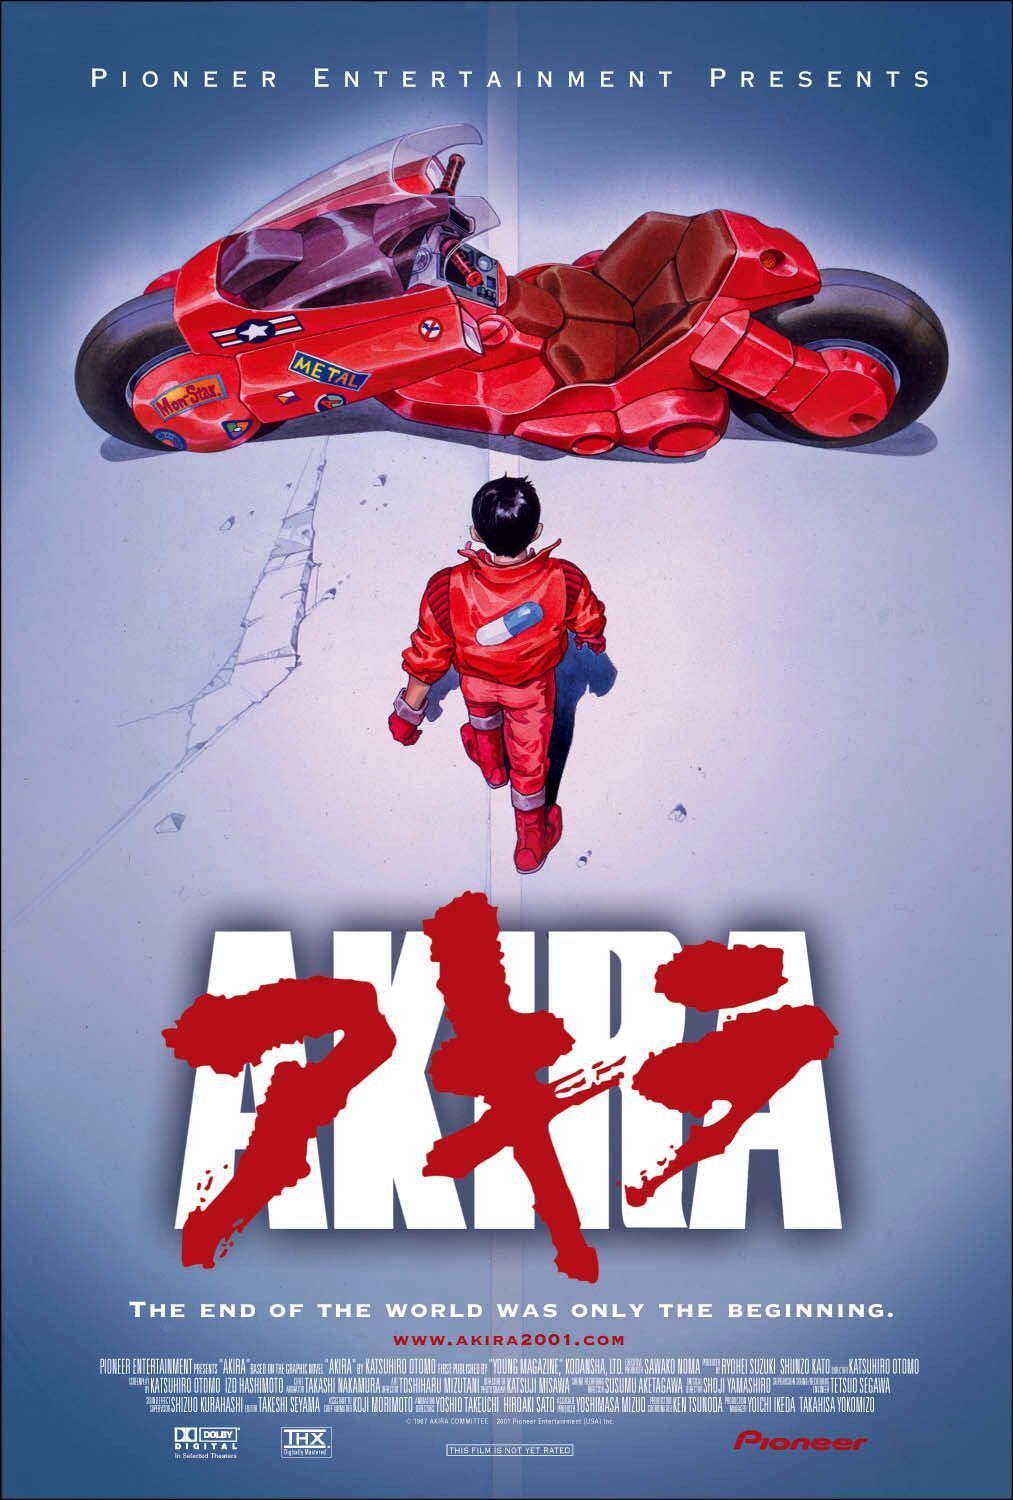 Biker Kaneda is confronted by many anti-social elements while trying to help his friend Tetsuo who is involved in a secret government project. Tetsuo's supernatural persona adds the final twist.